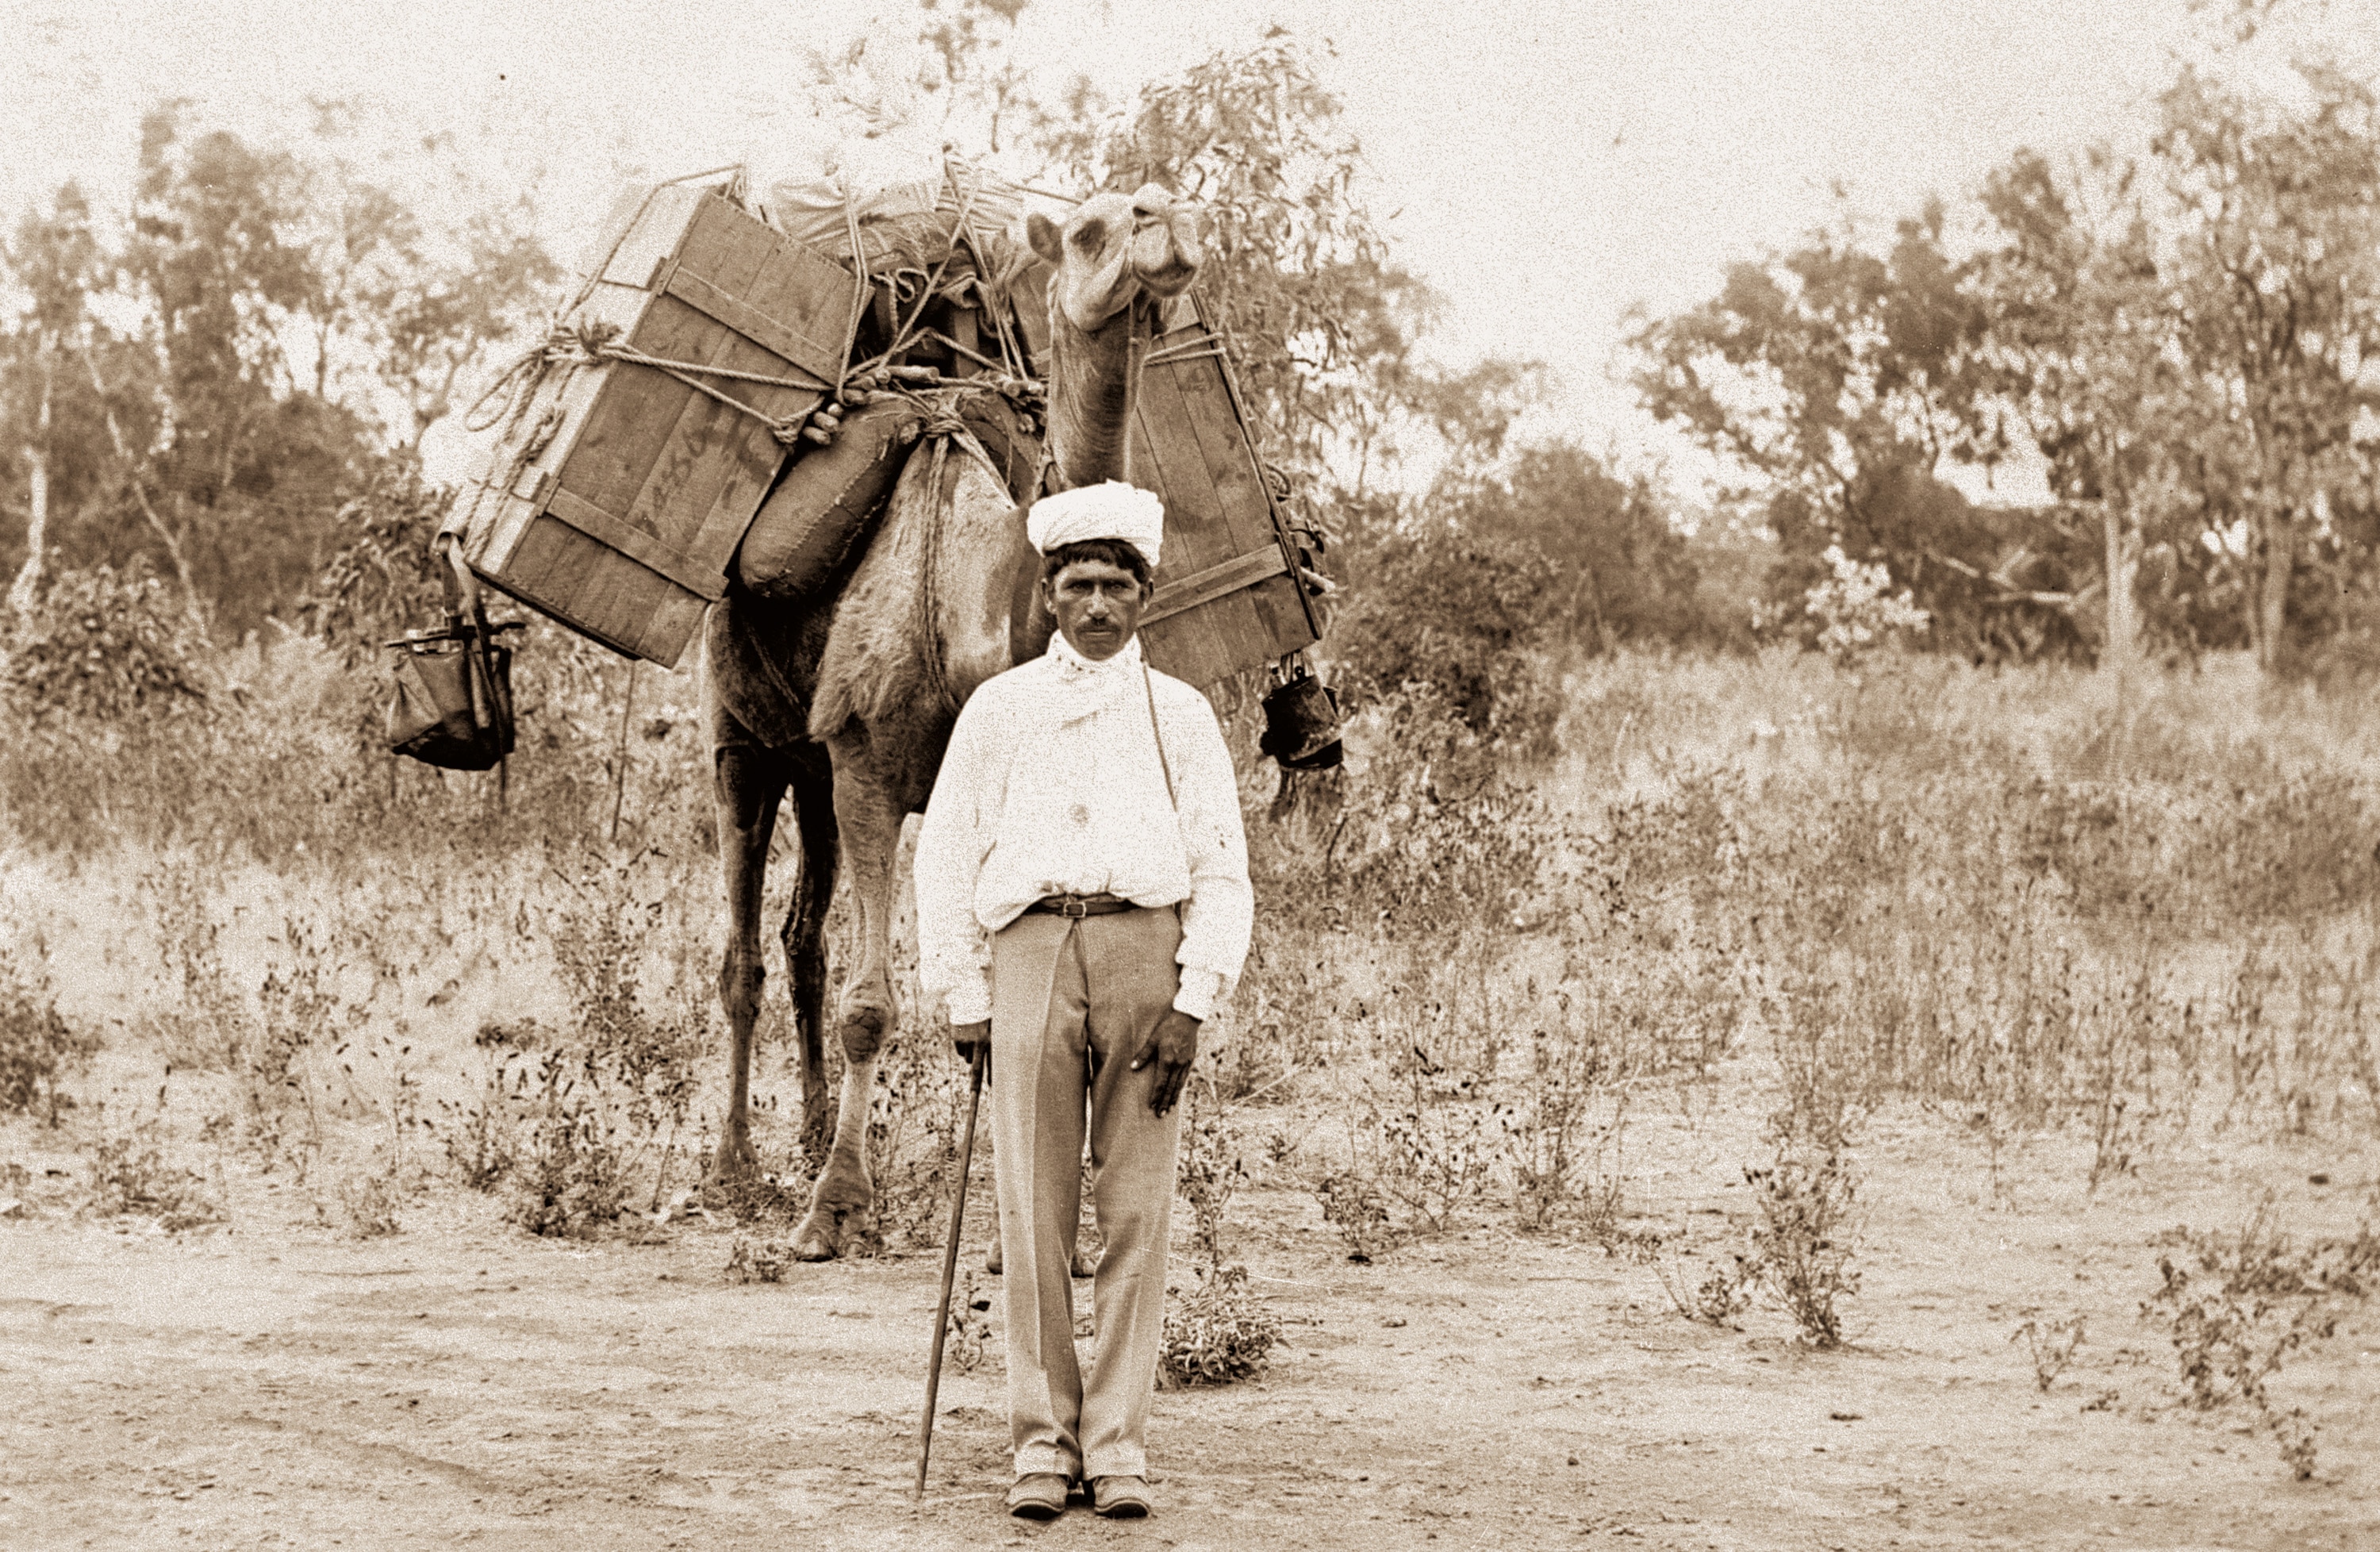 An undated handout photo of a cameleer and camel, c1900. - Australia's Muslim Cameleers exhibition, Dec. 12, 2007,Canberra. (AAP /State Library of Queensland)